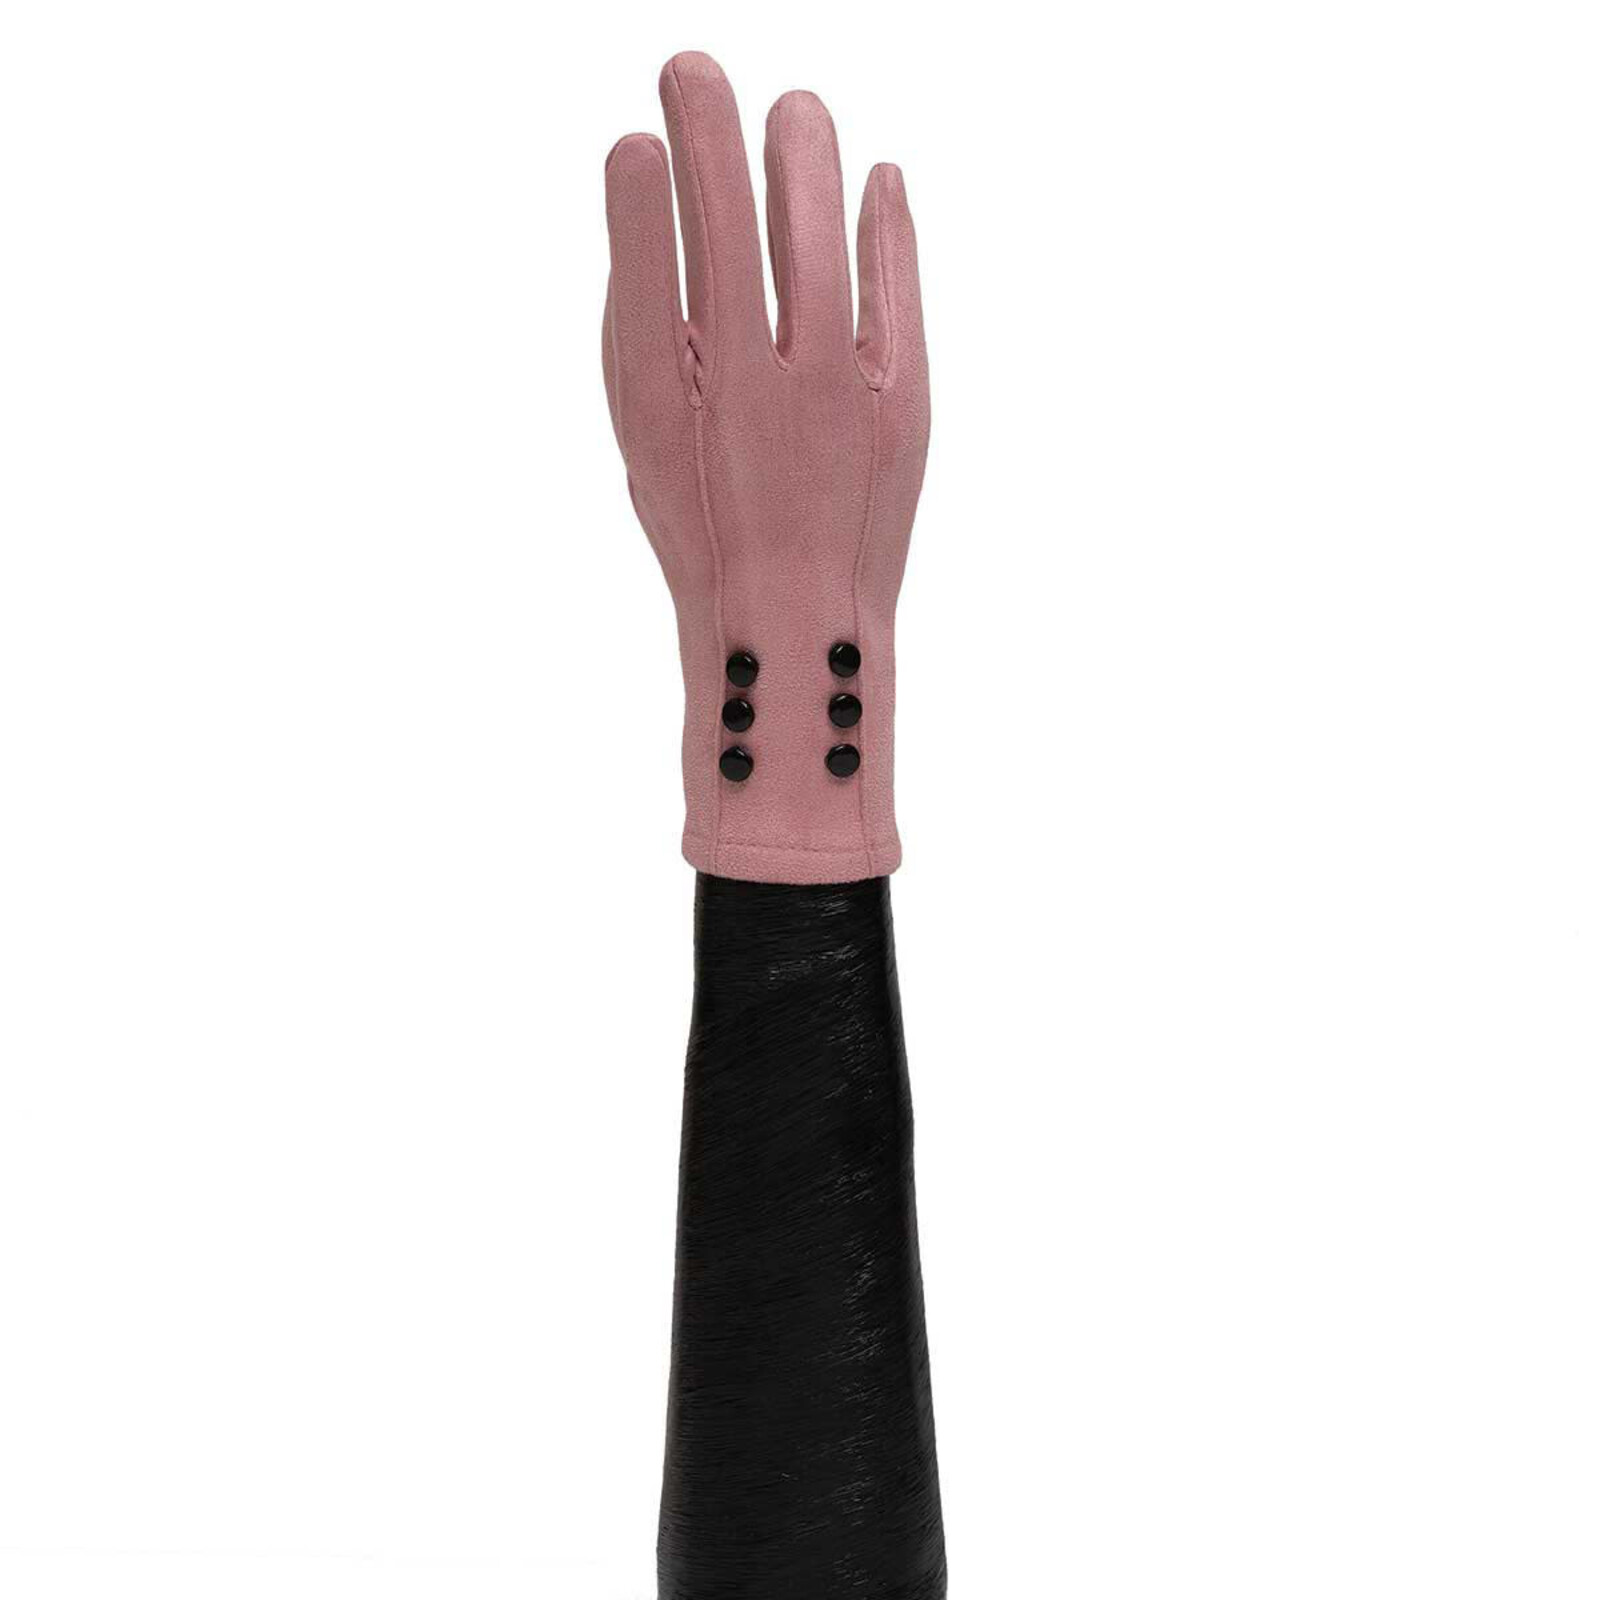 Trezo PINK GLOVES WITH 6 BLACK BUTTONS    X8090 loading=